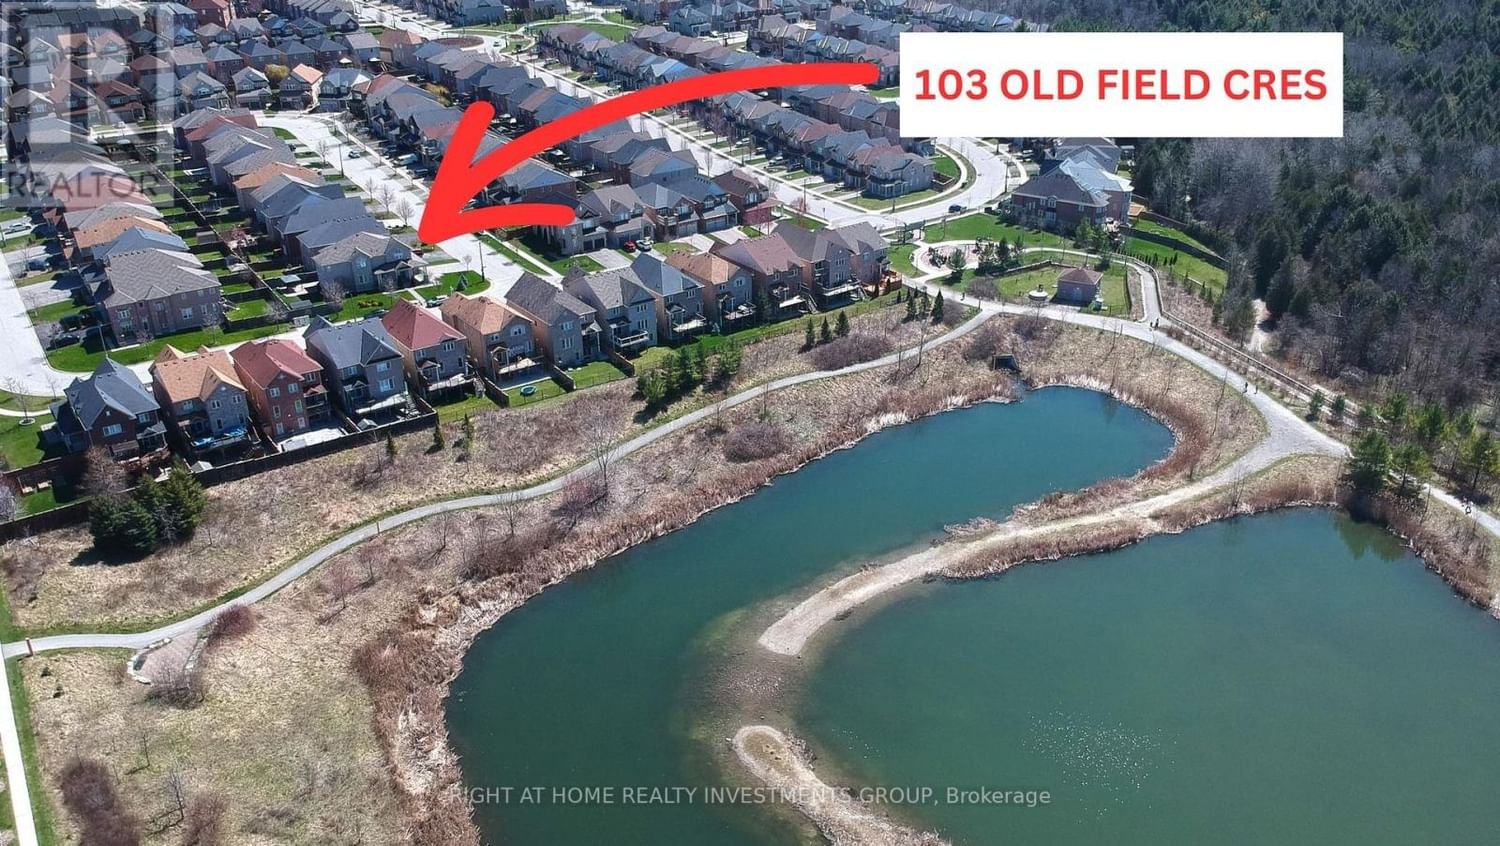 103 OLD FIELD CRES Image 3